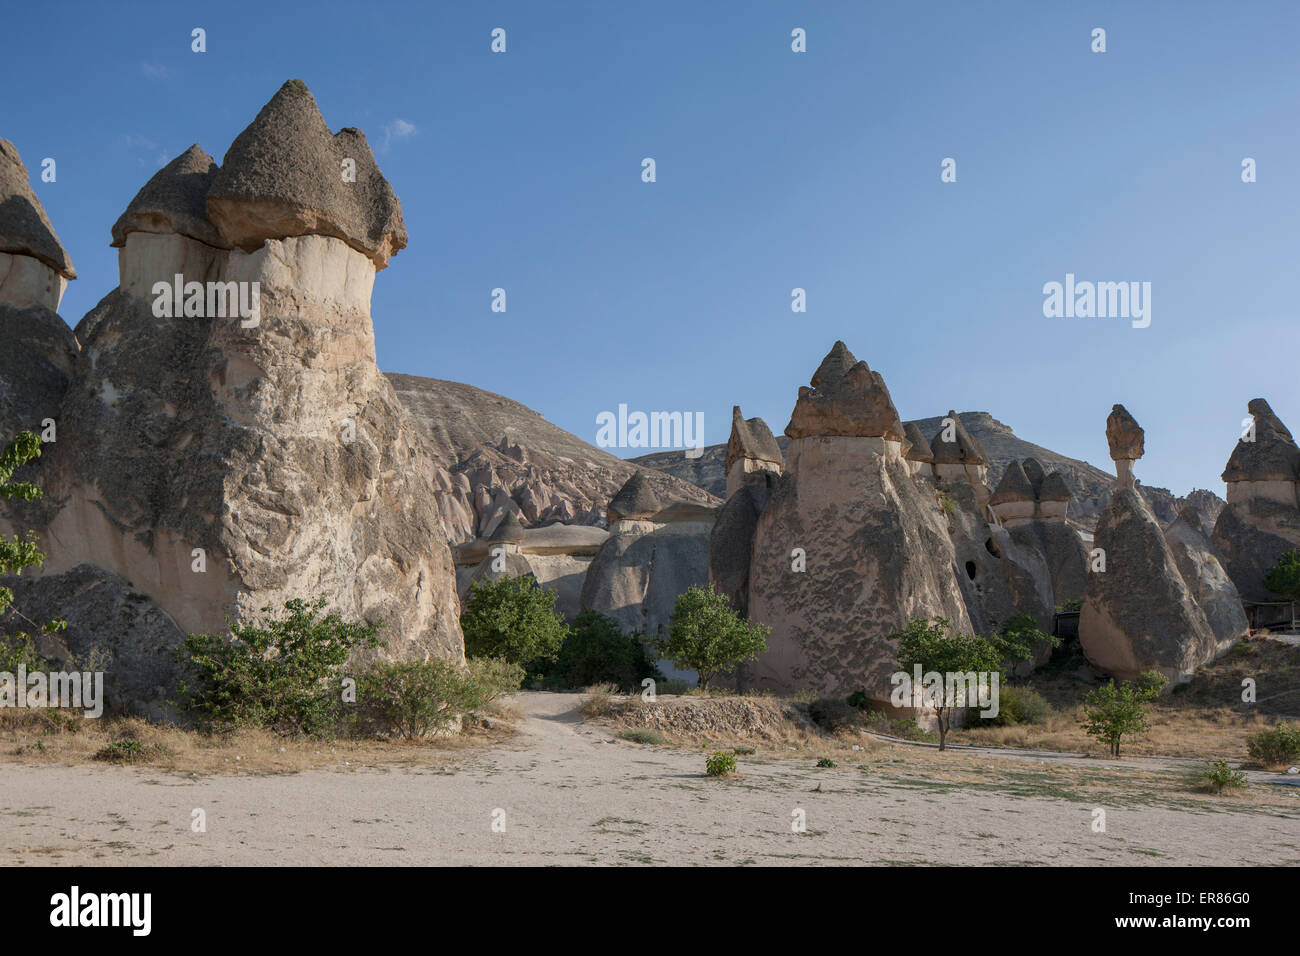 Eroded rock formations against clear blue sky Stock Photo